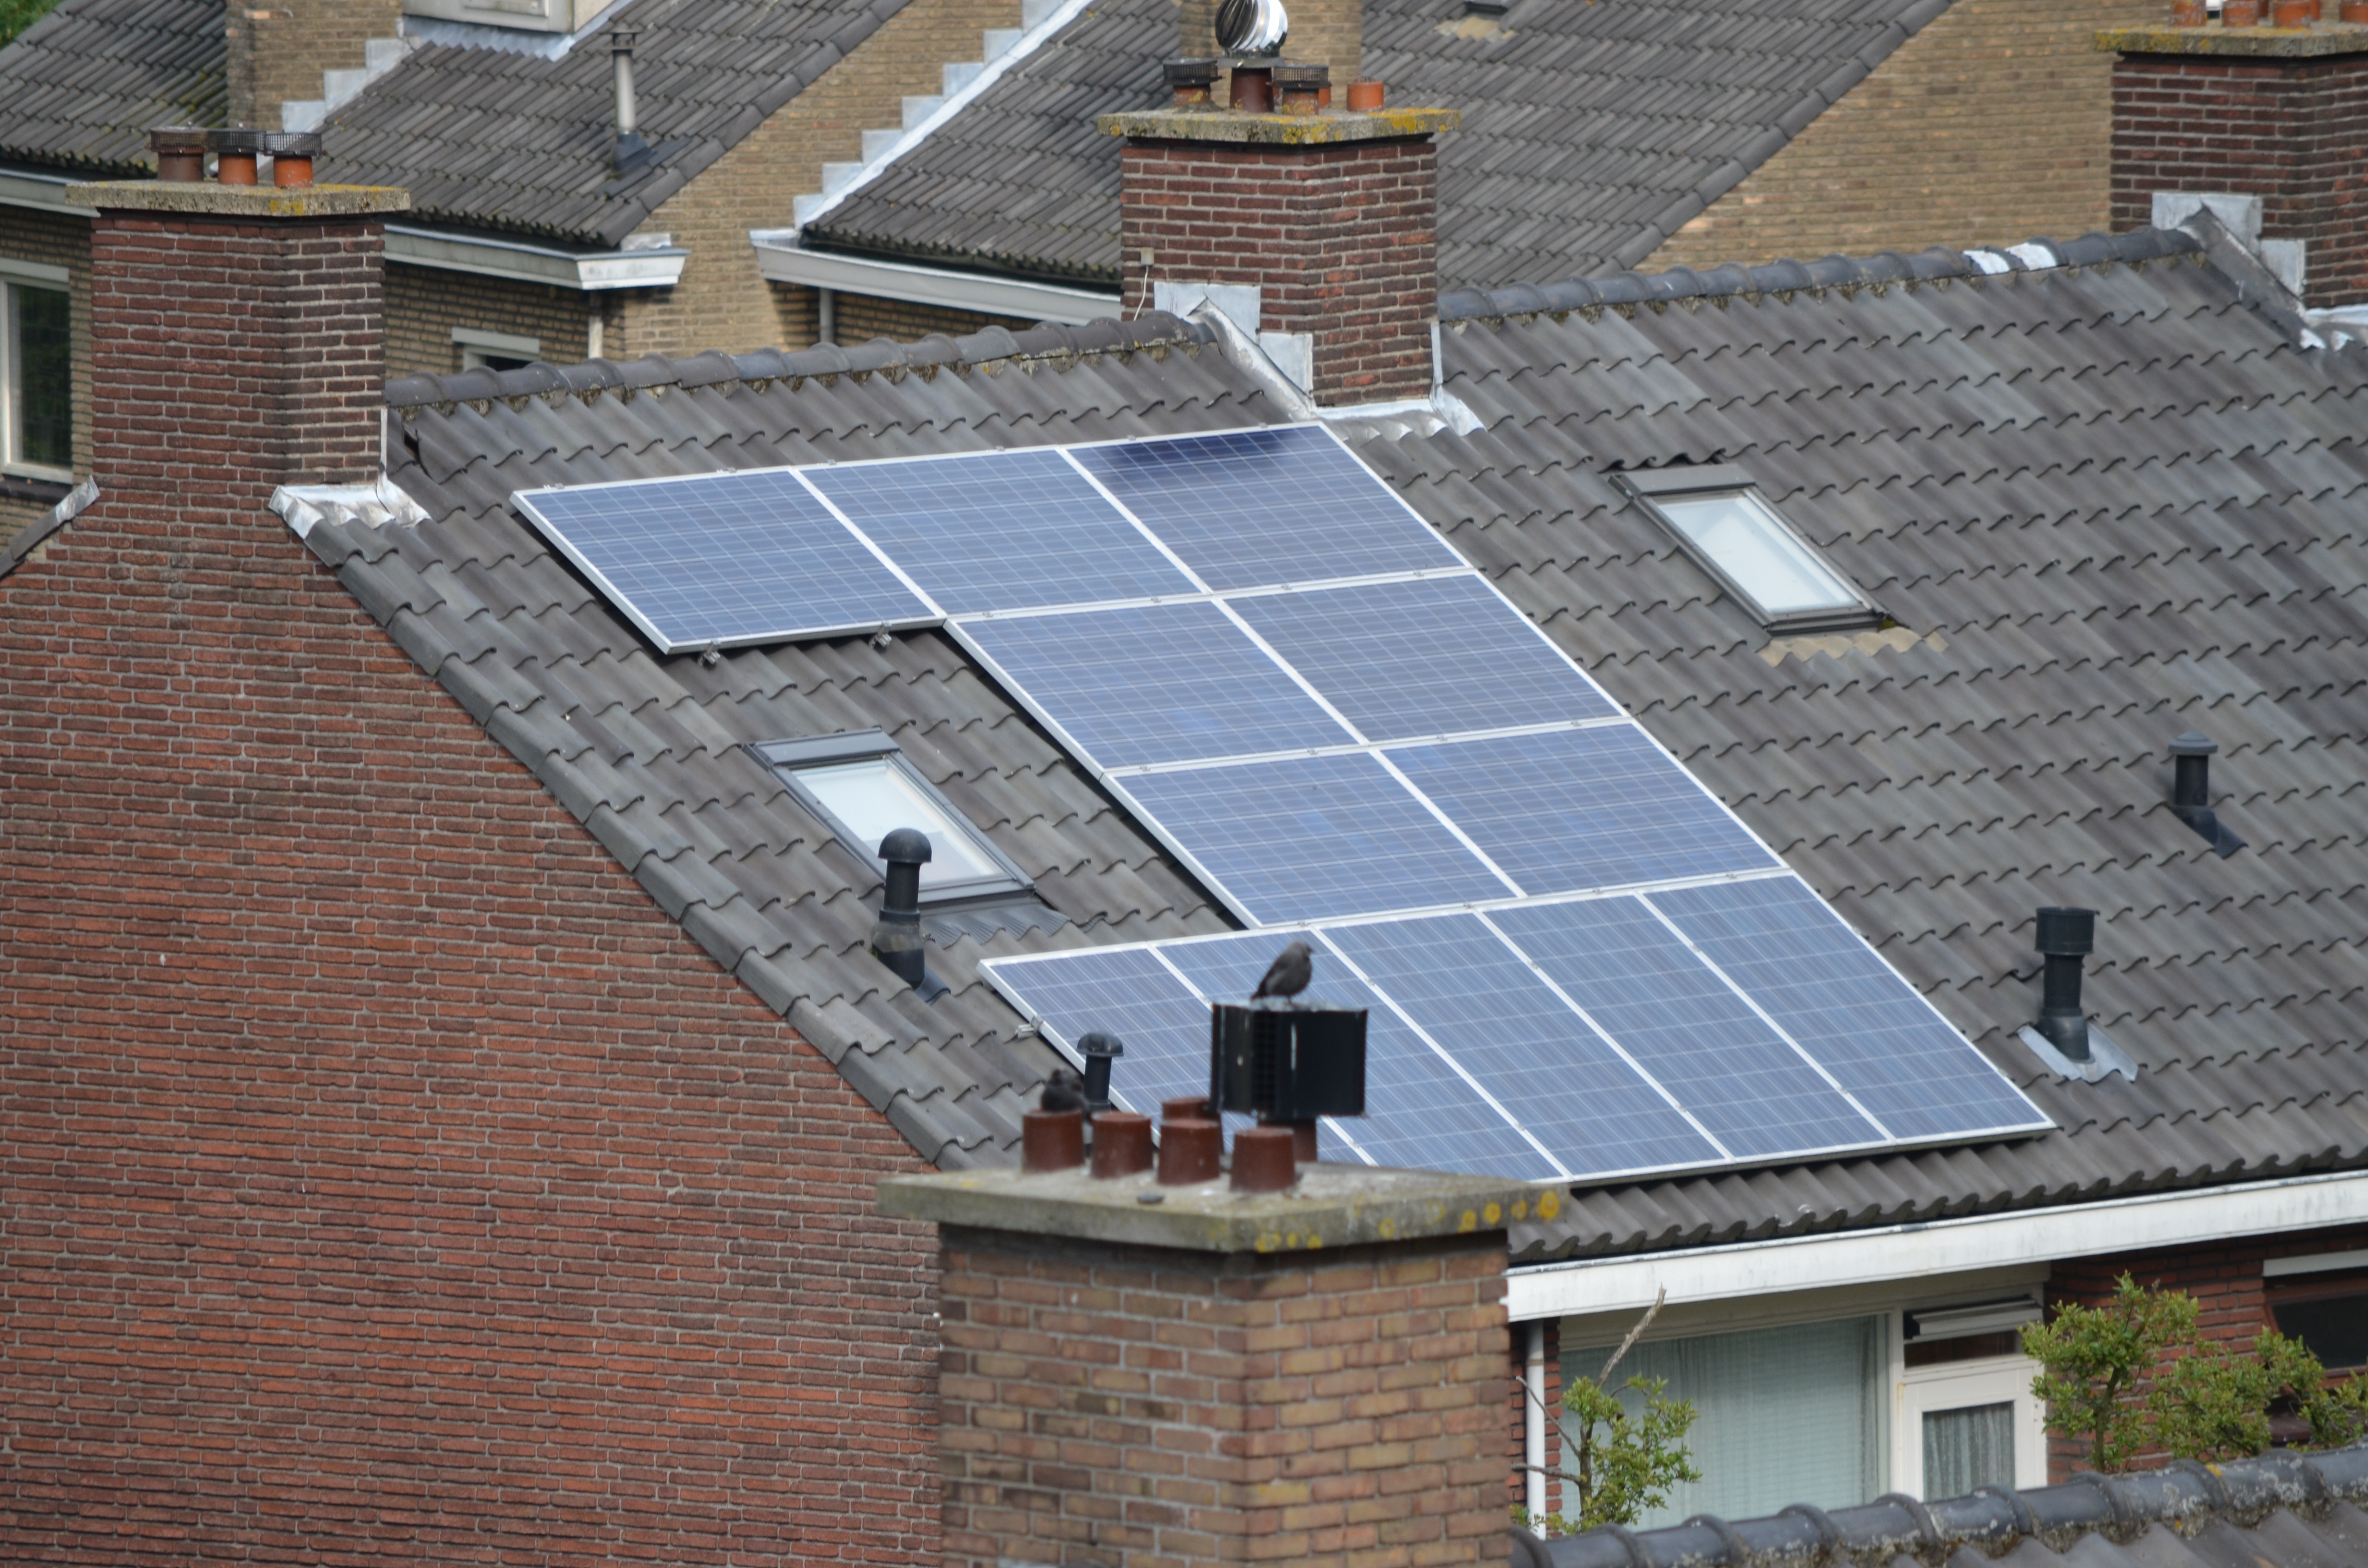 Solar_panel_on_a_roof_The_Netherlands_2